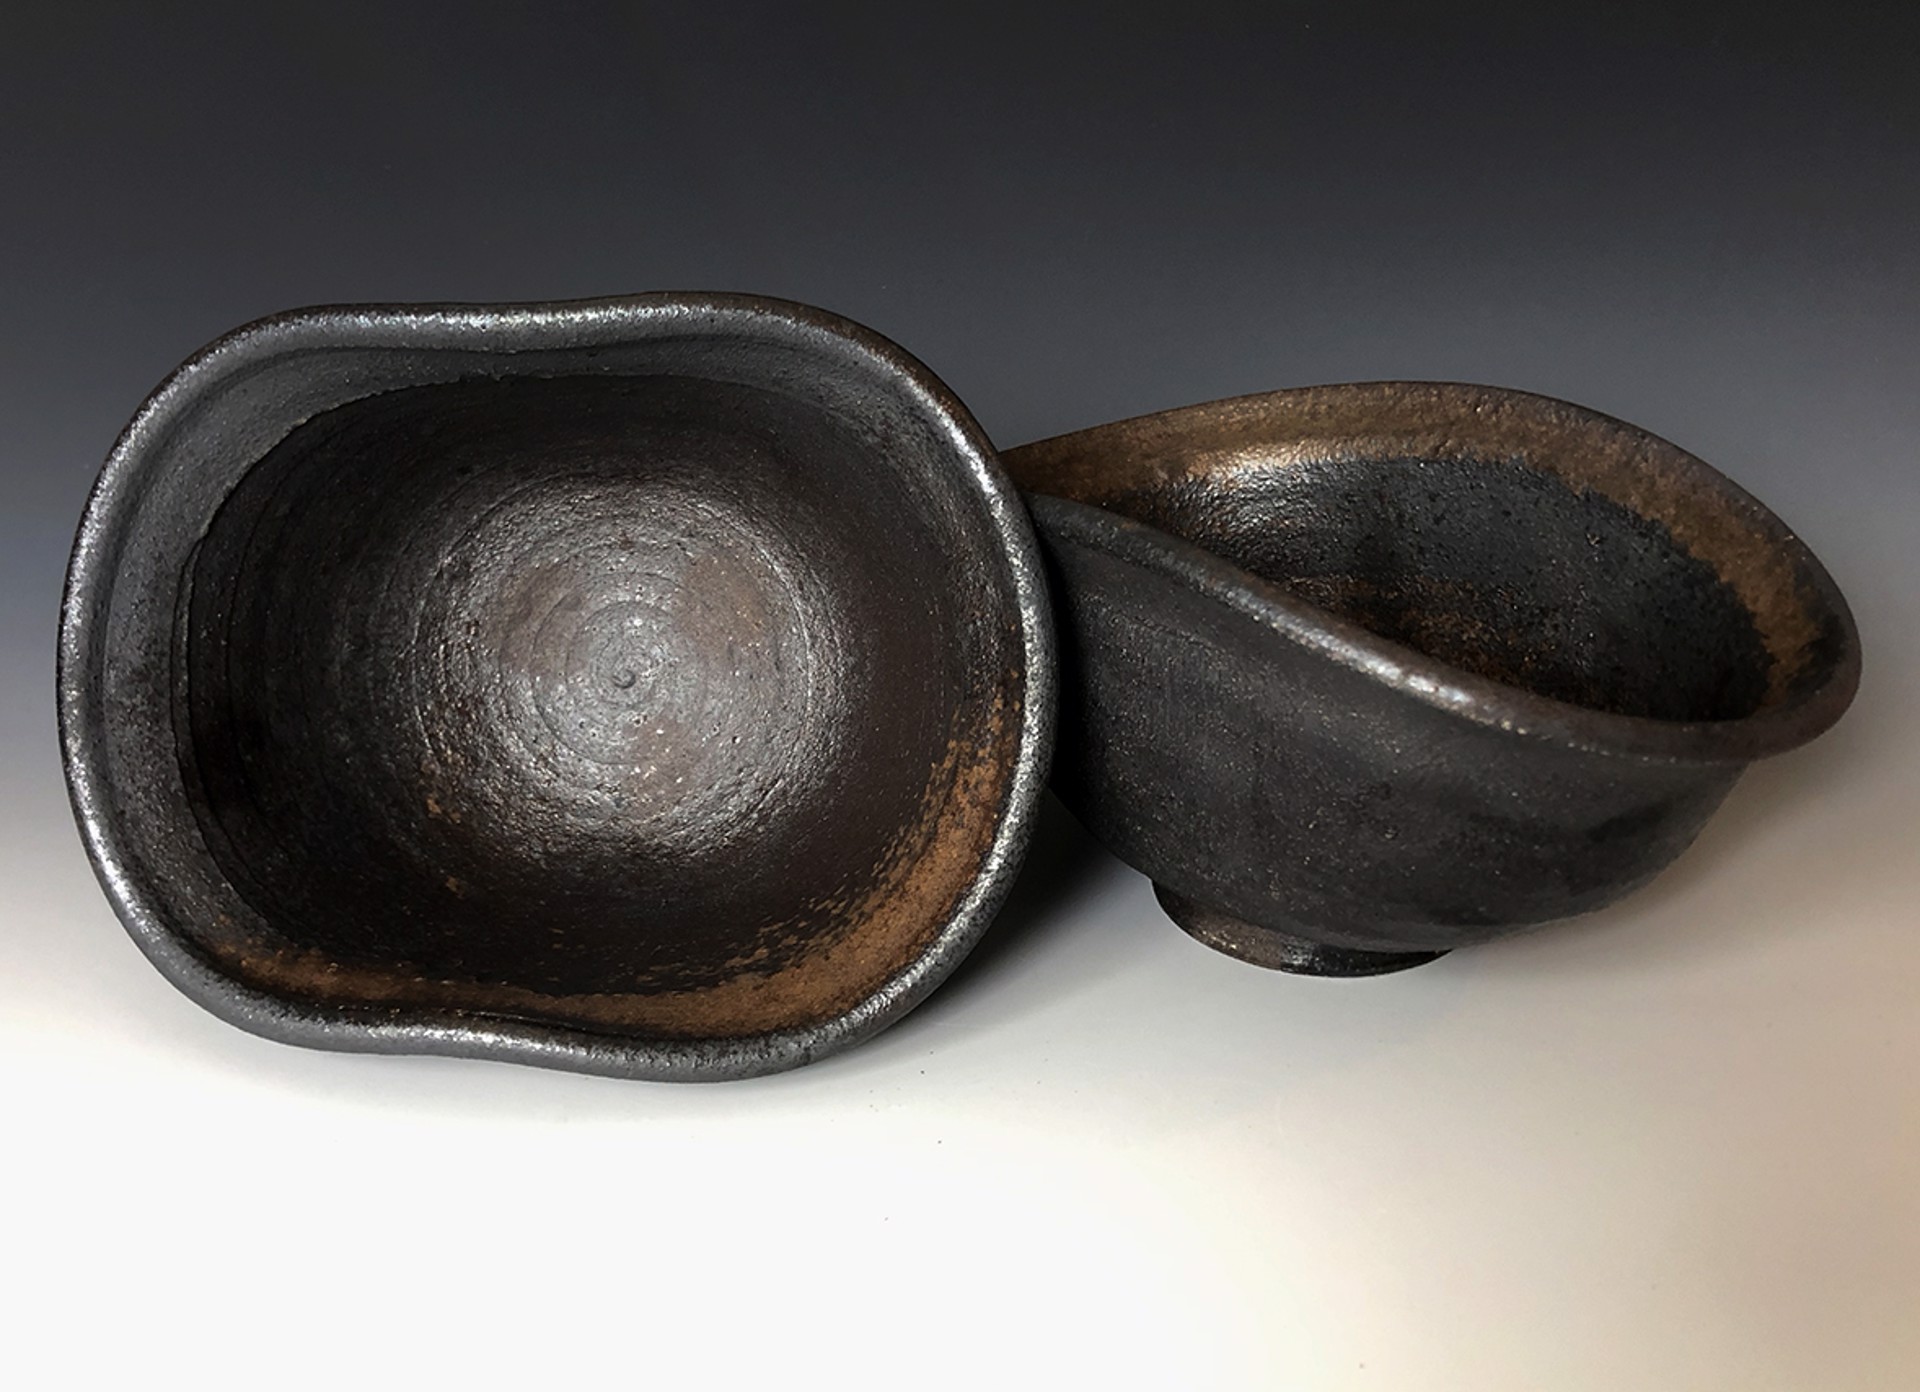 Black Cowboy Bowl (left in image) by Dom Venzant